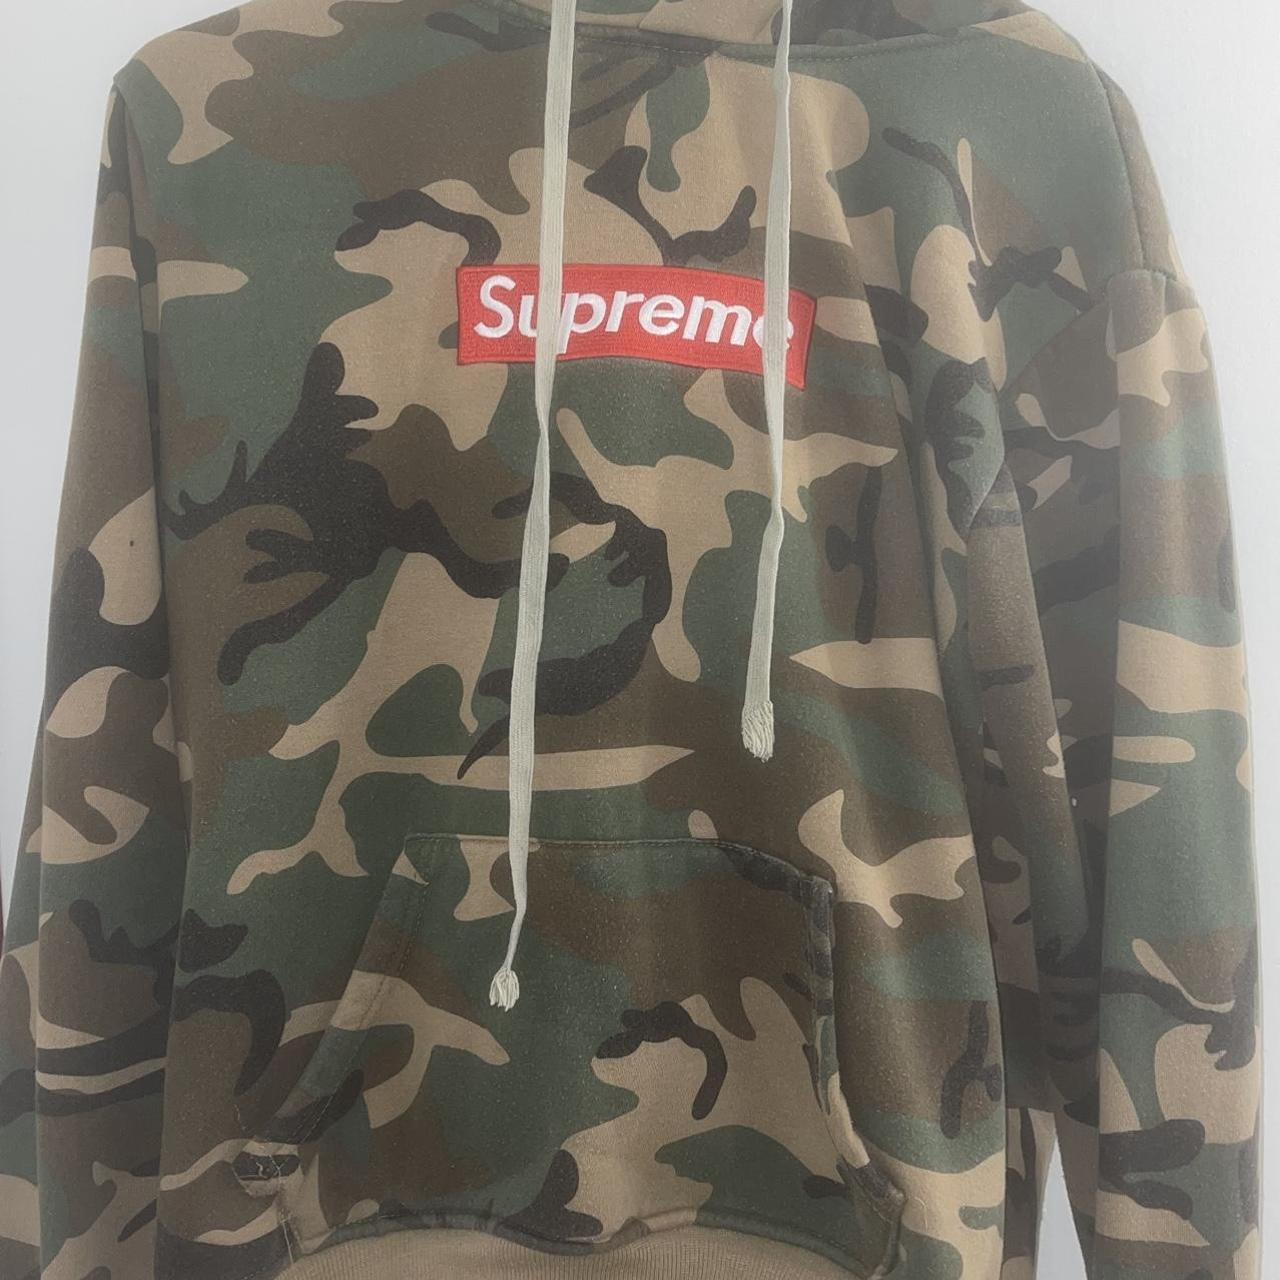 Camo supreme hoodie size small and taking offers - Depop